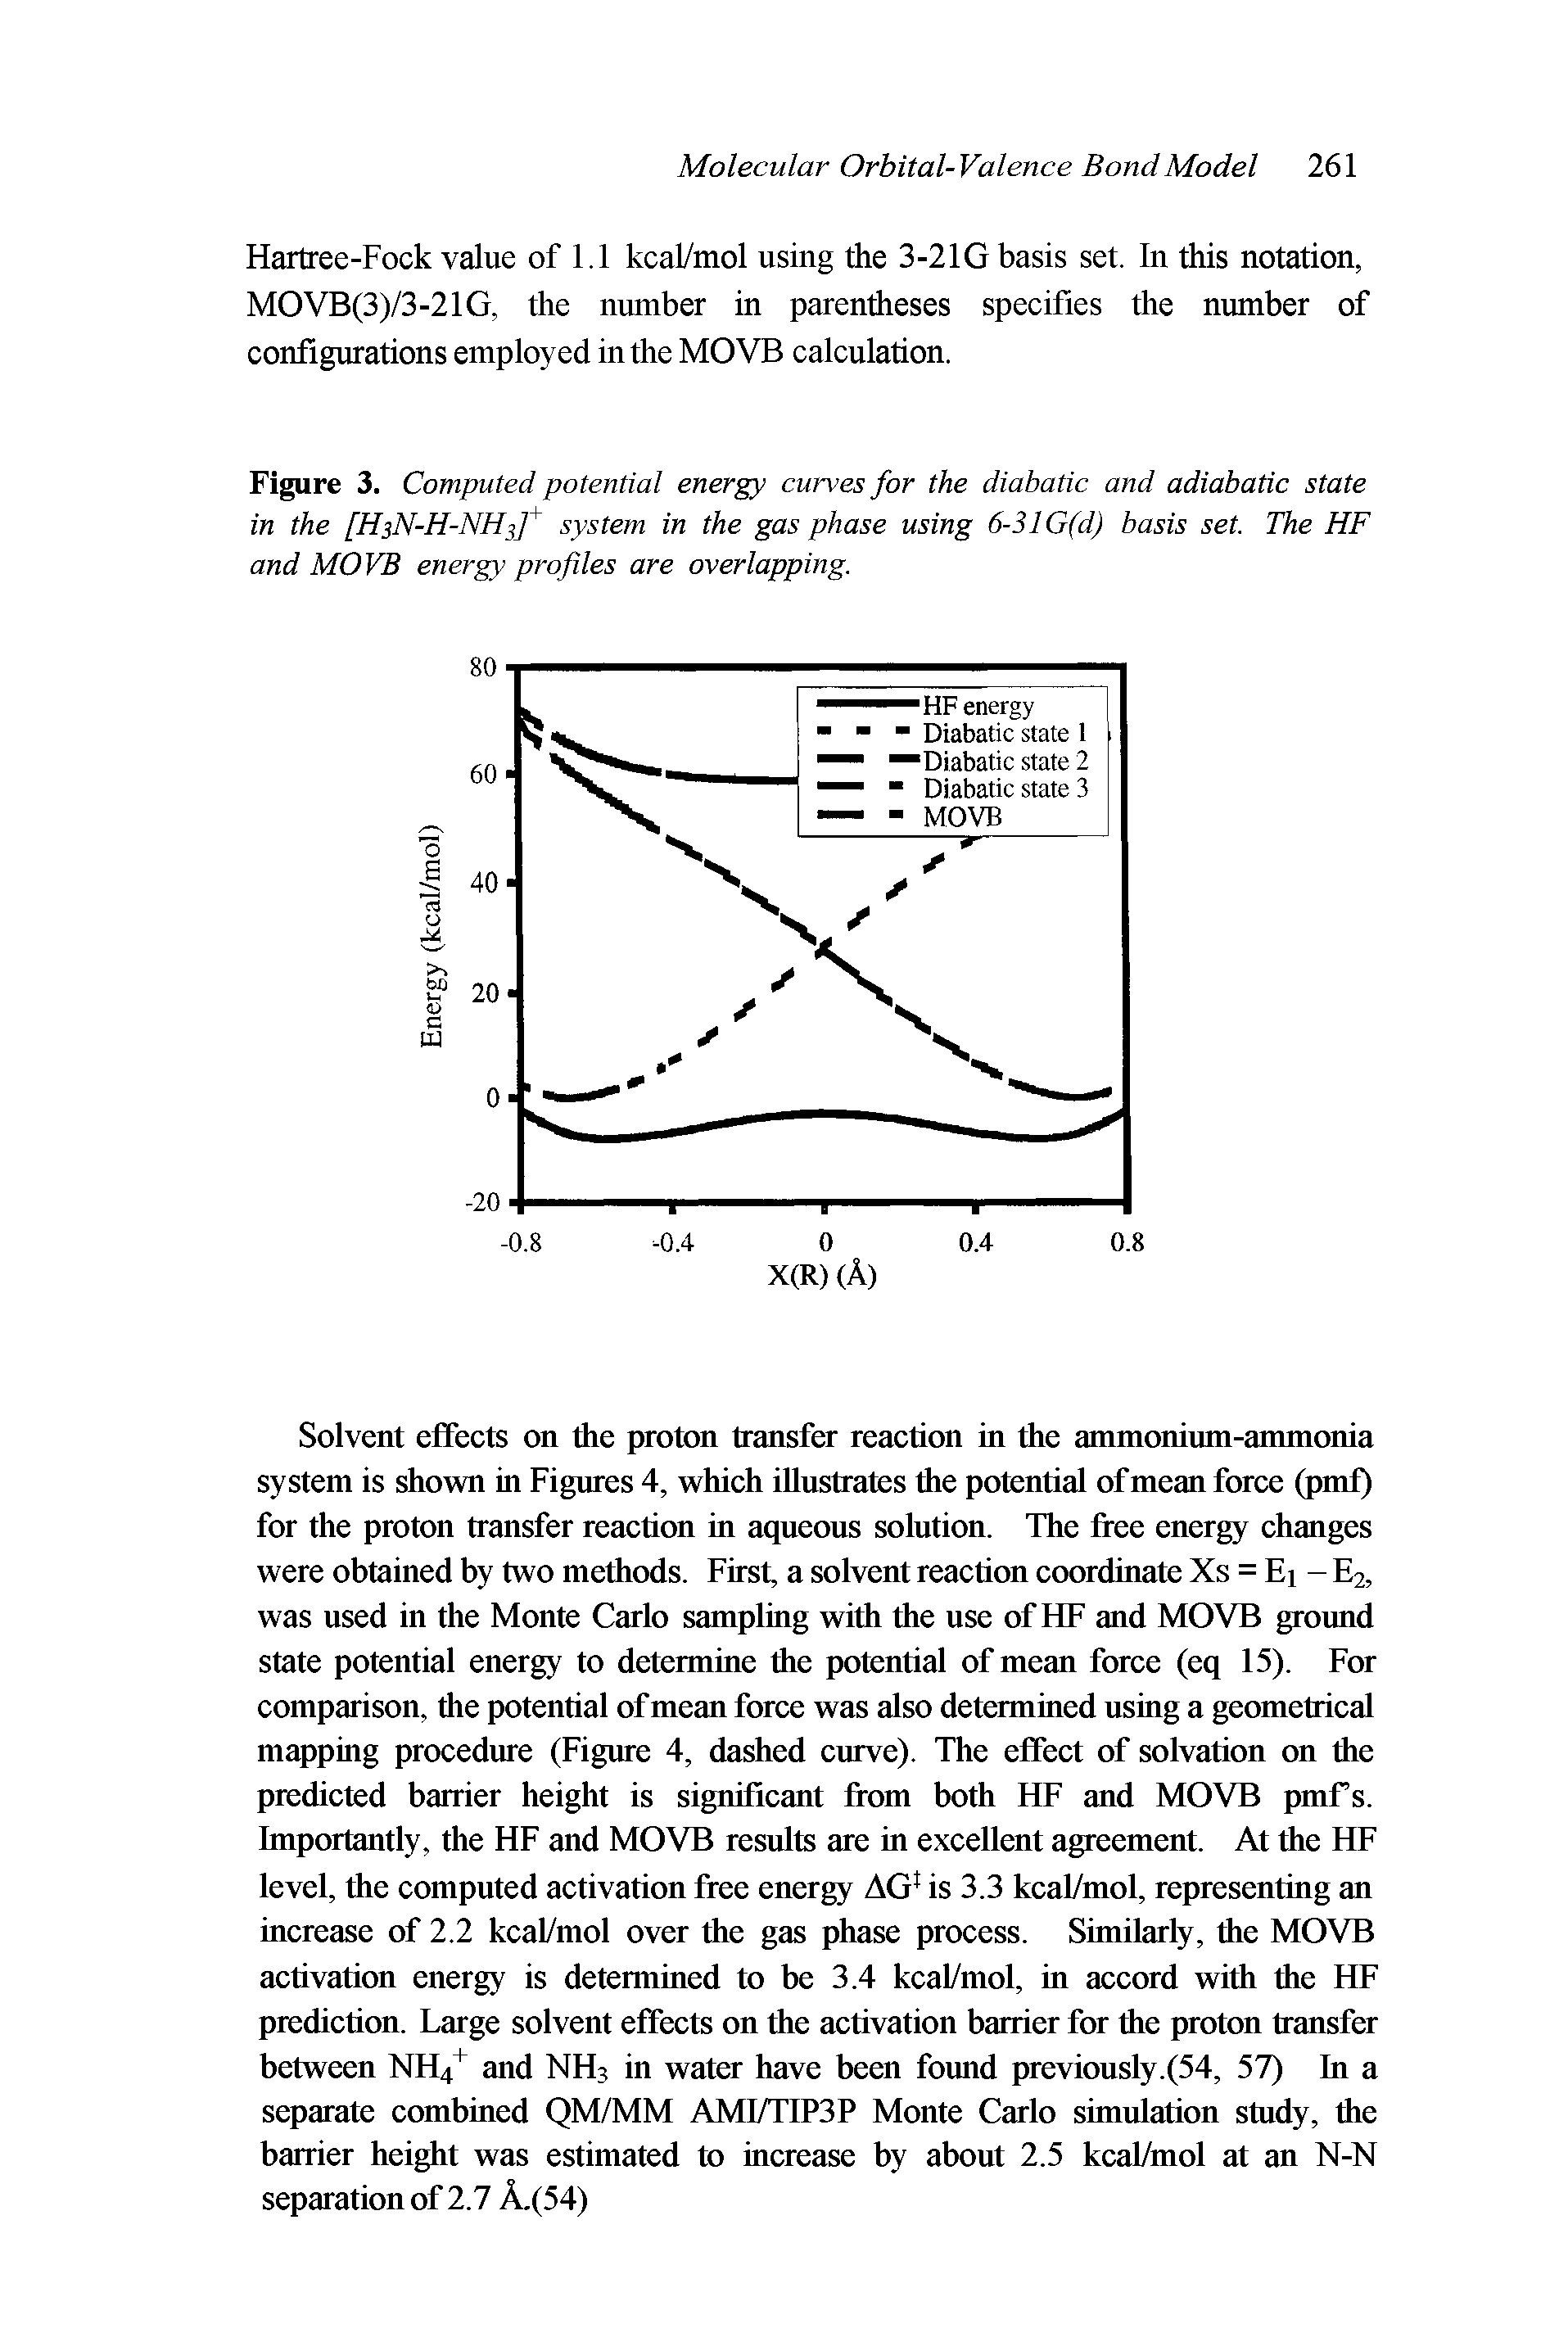 Figure 3. Computed potential energy curves for the diabatic and adiabatic state in the [HsN-H-NH ] system in the gas phase using 6-31G(d) basis set. The HF and MOVE energy profiles are overlapping.